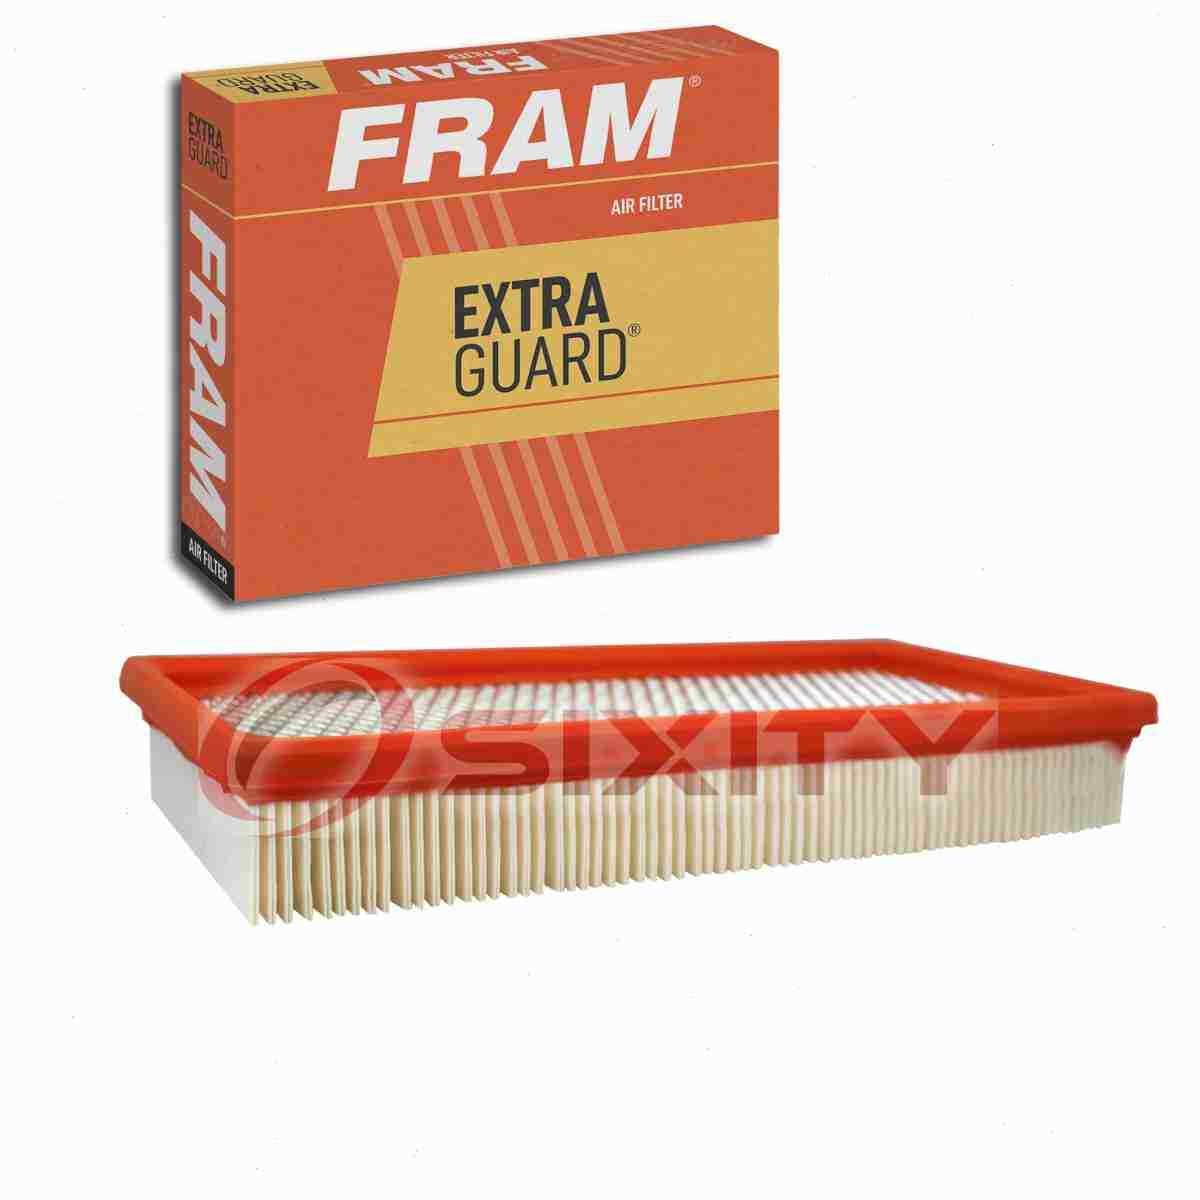 FRAM Extra Guard Air Filter for 1989-1995 Plymouth Acclaim 2.5L L4 Intake ku